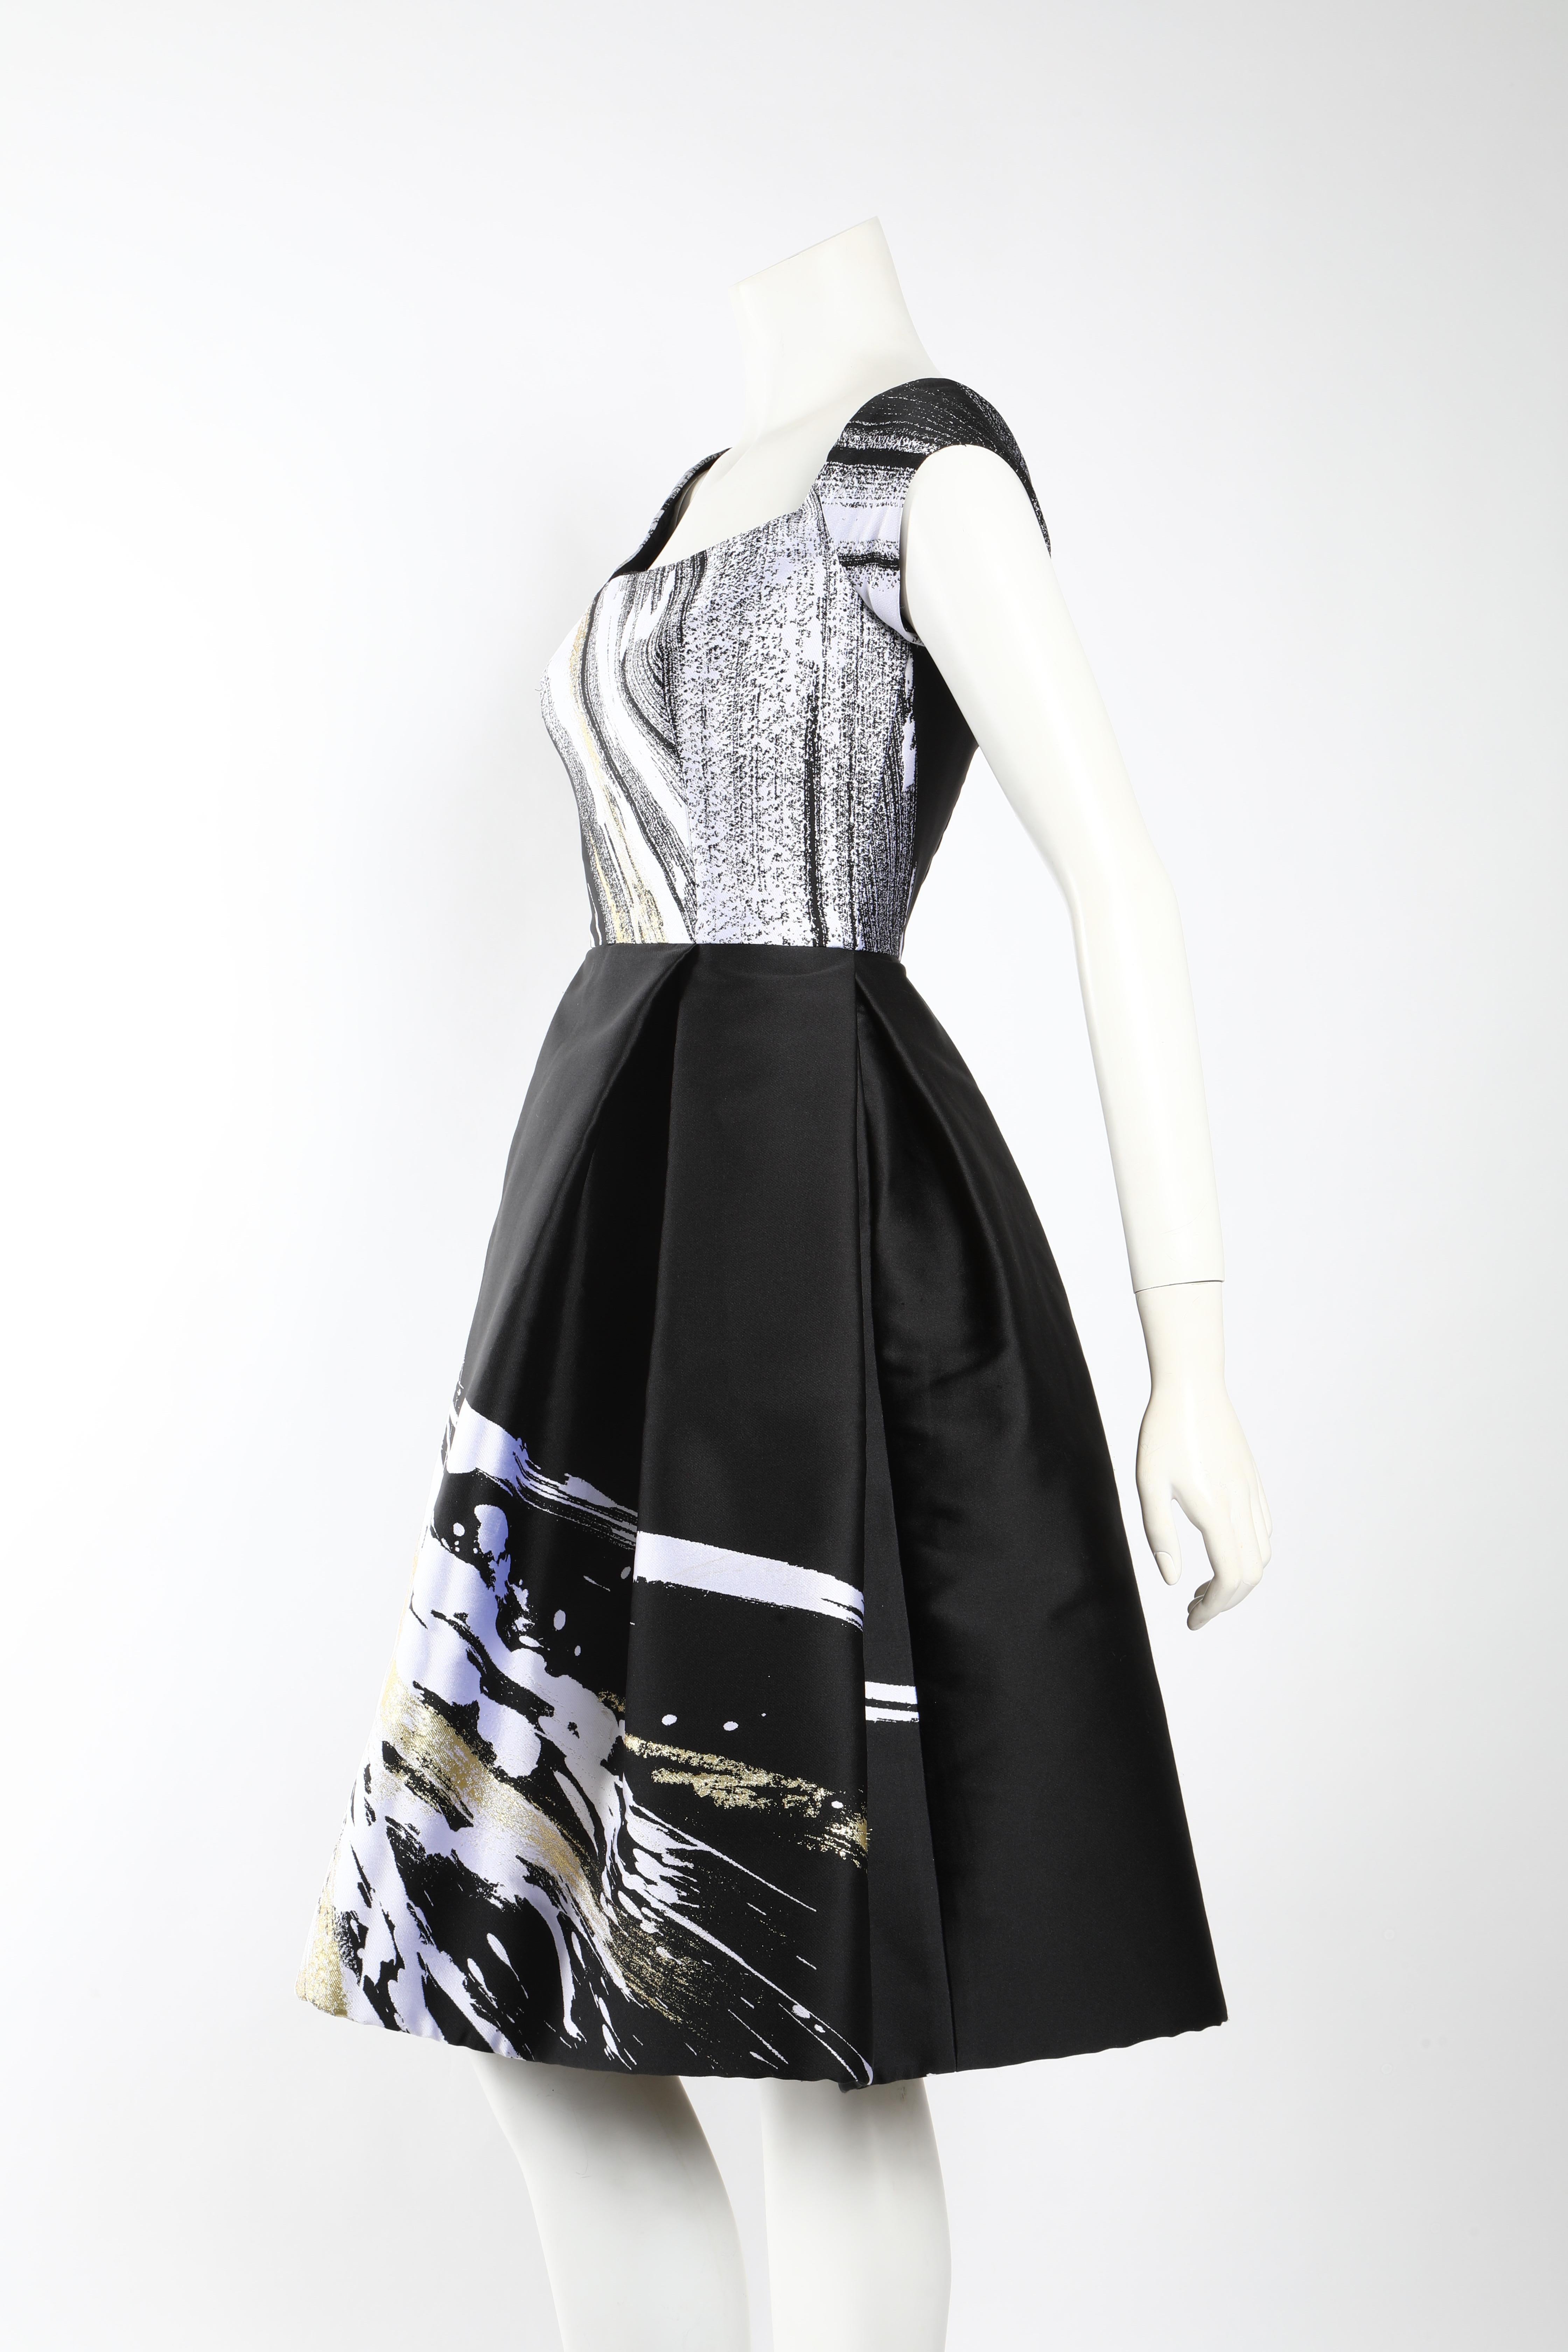 Cocktail dress by Dennis Basso in black and white adorned with a whimsical splash of gold. Features a boat neck and cap sleeves. Fitted through the bodice with a full skirt that hits at the knee. Boning in the bodice creates structured shape, which